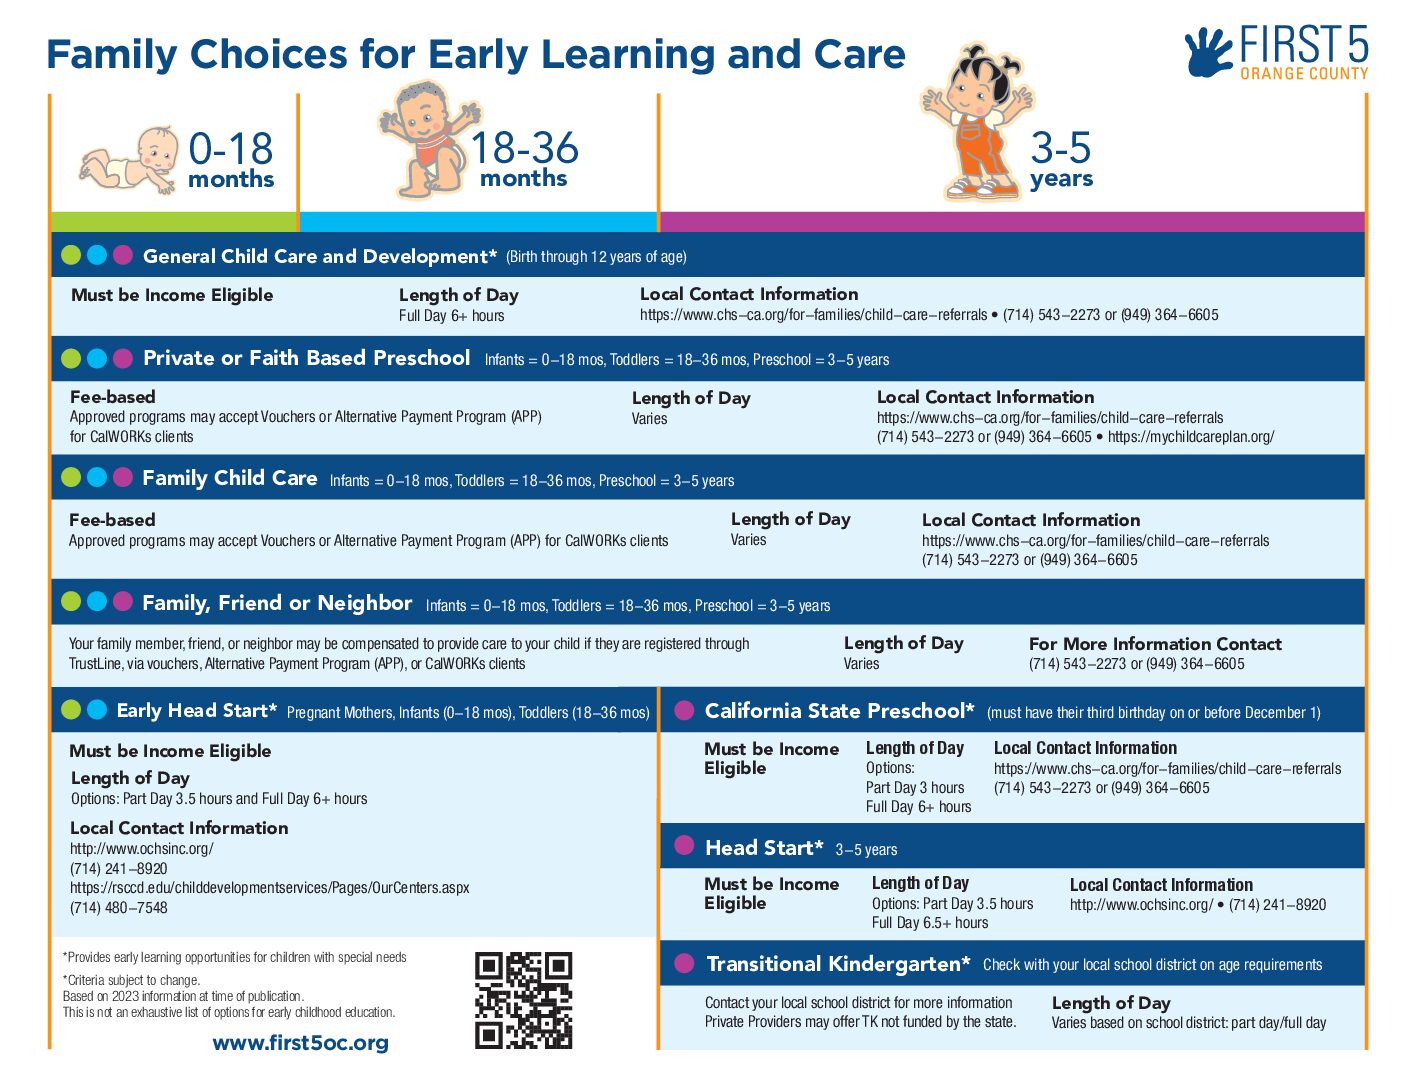 Preschool, TK or child care? Guide assists families in choices they have